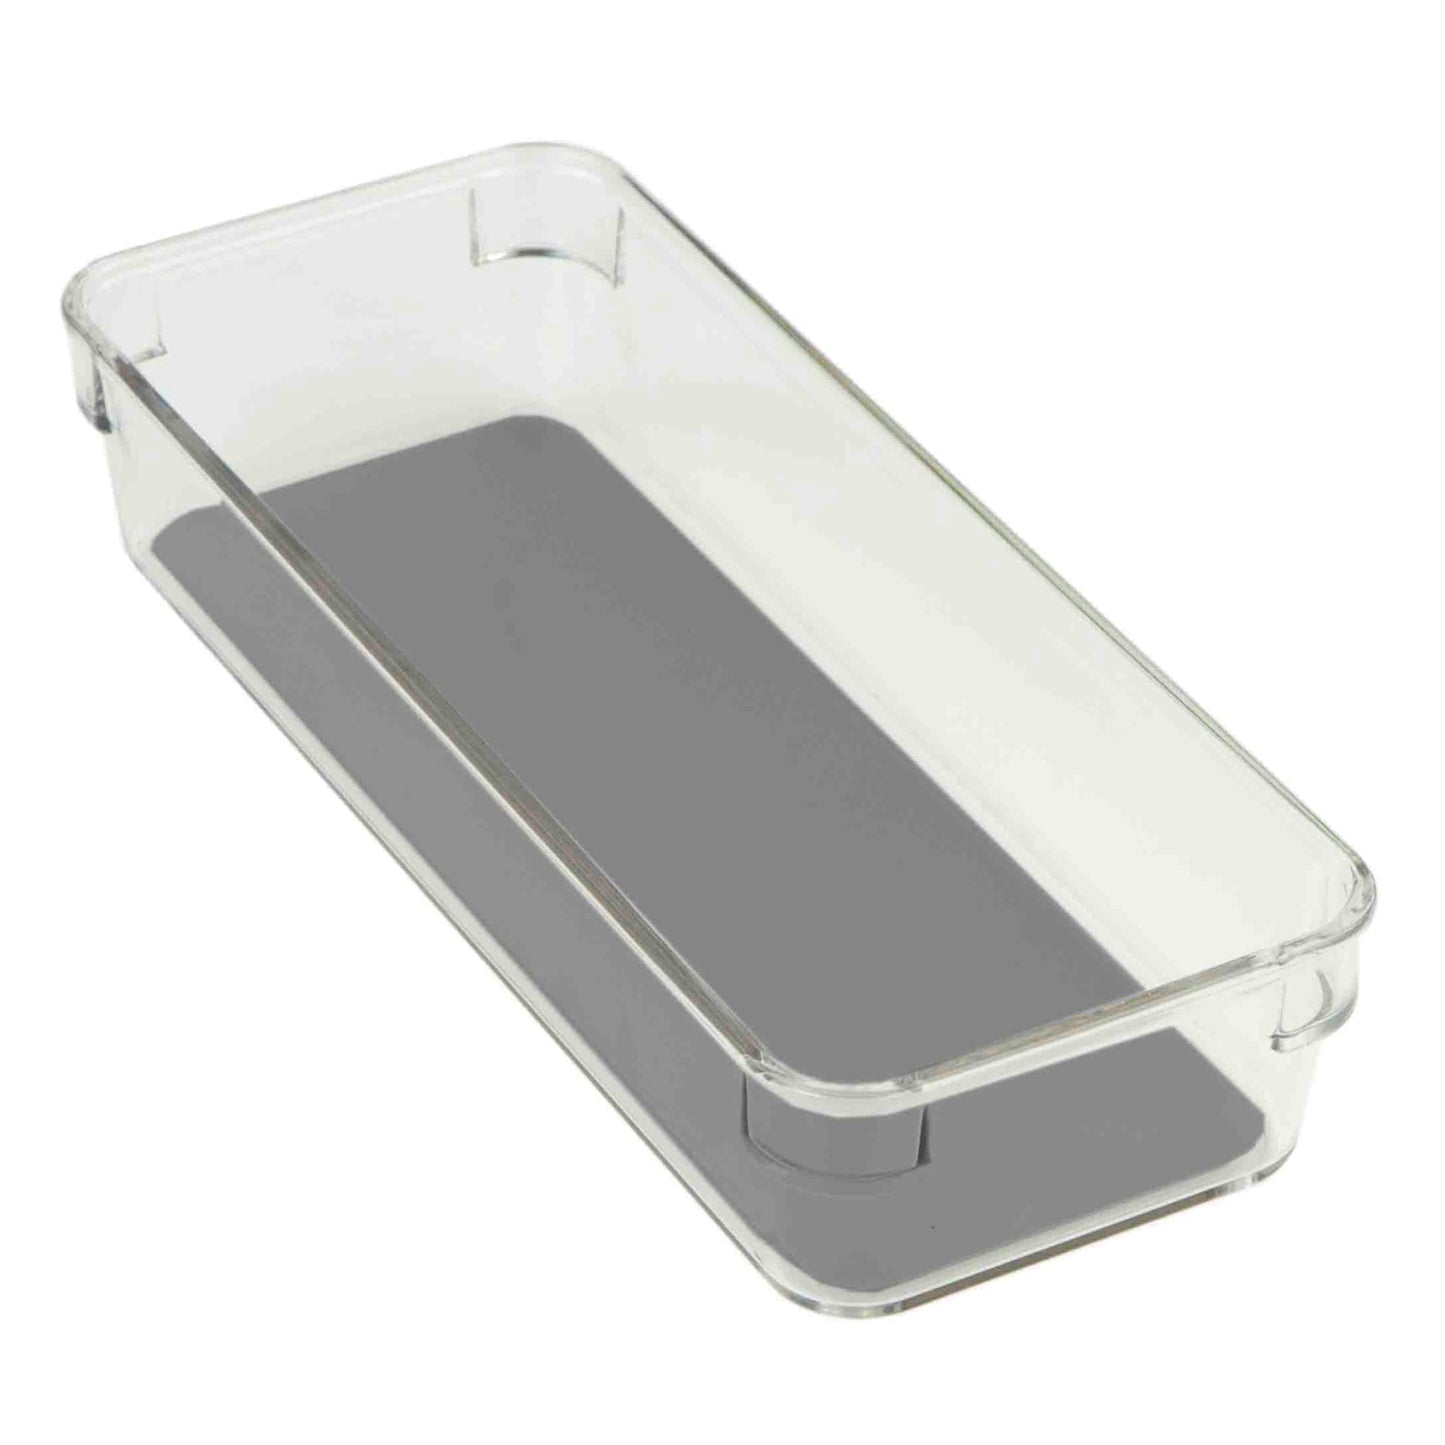 3" x 9" x 2" Plastic Drawer Organizer with Rubber Liner